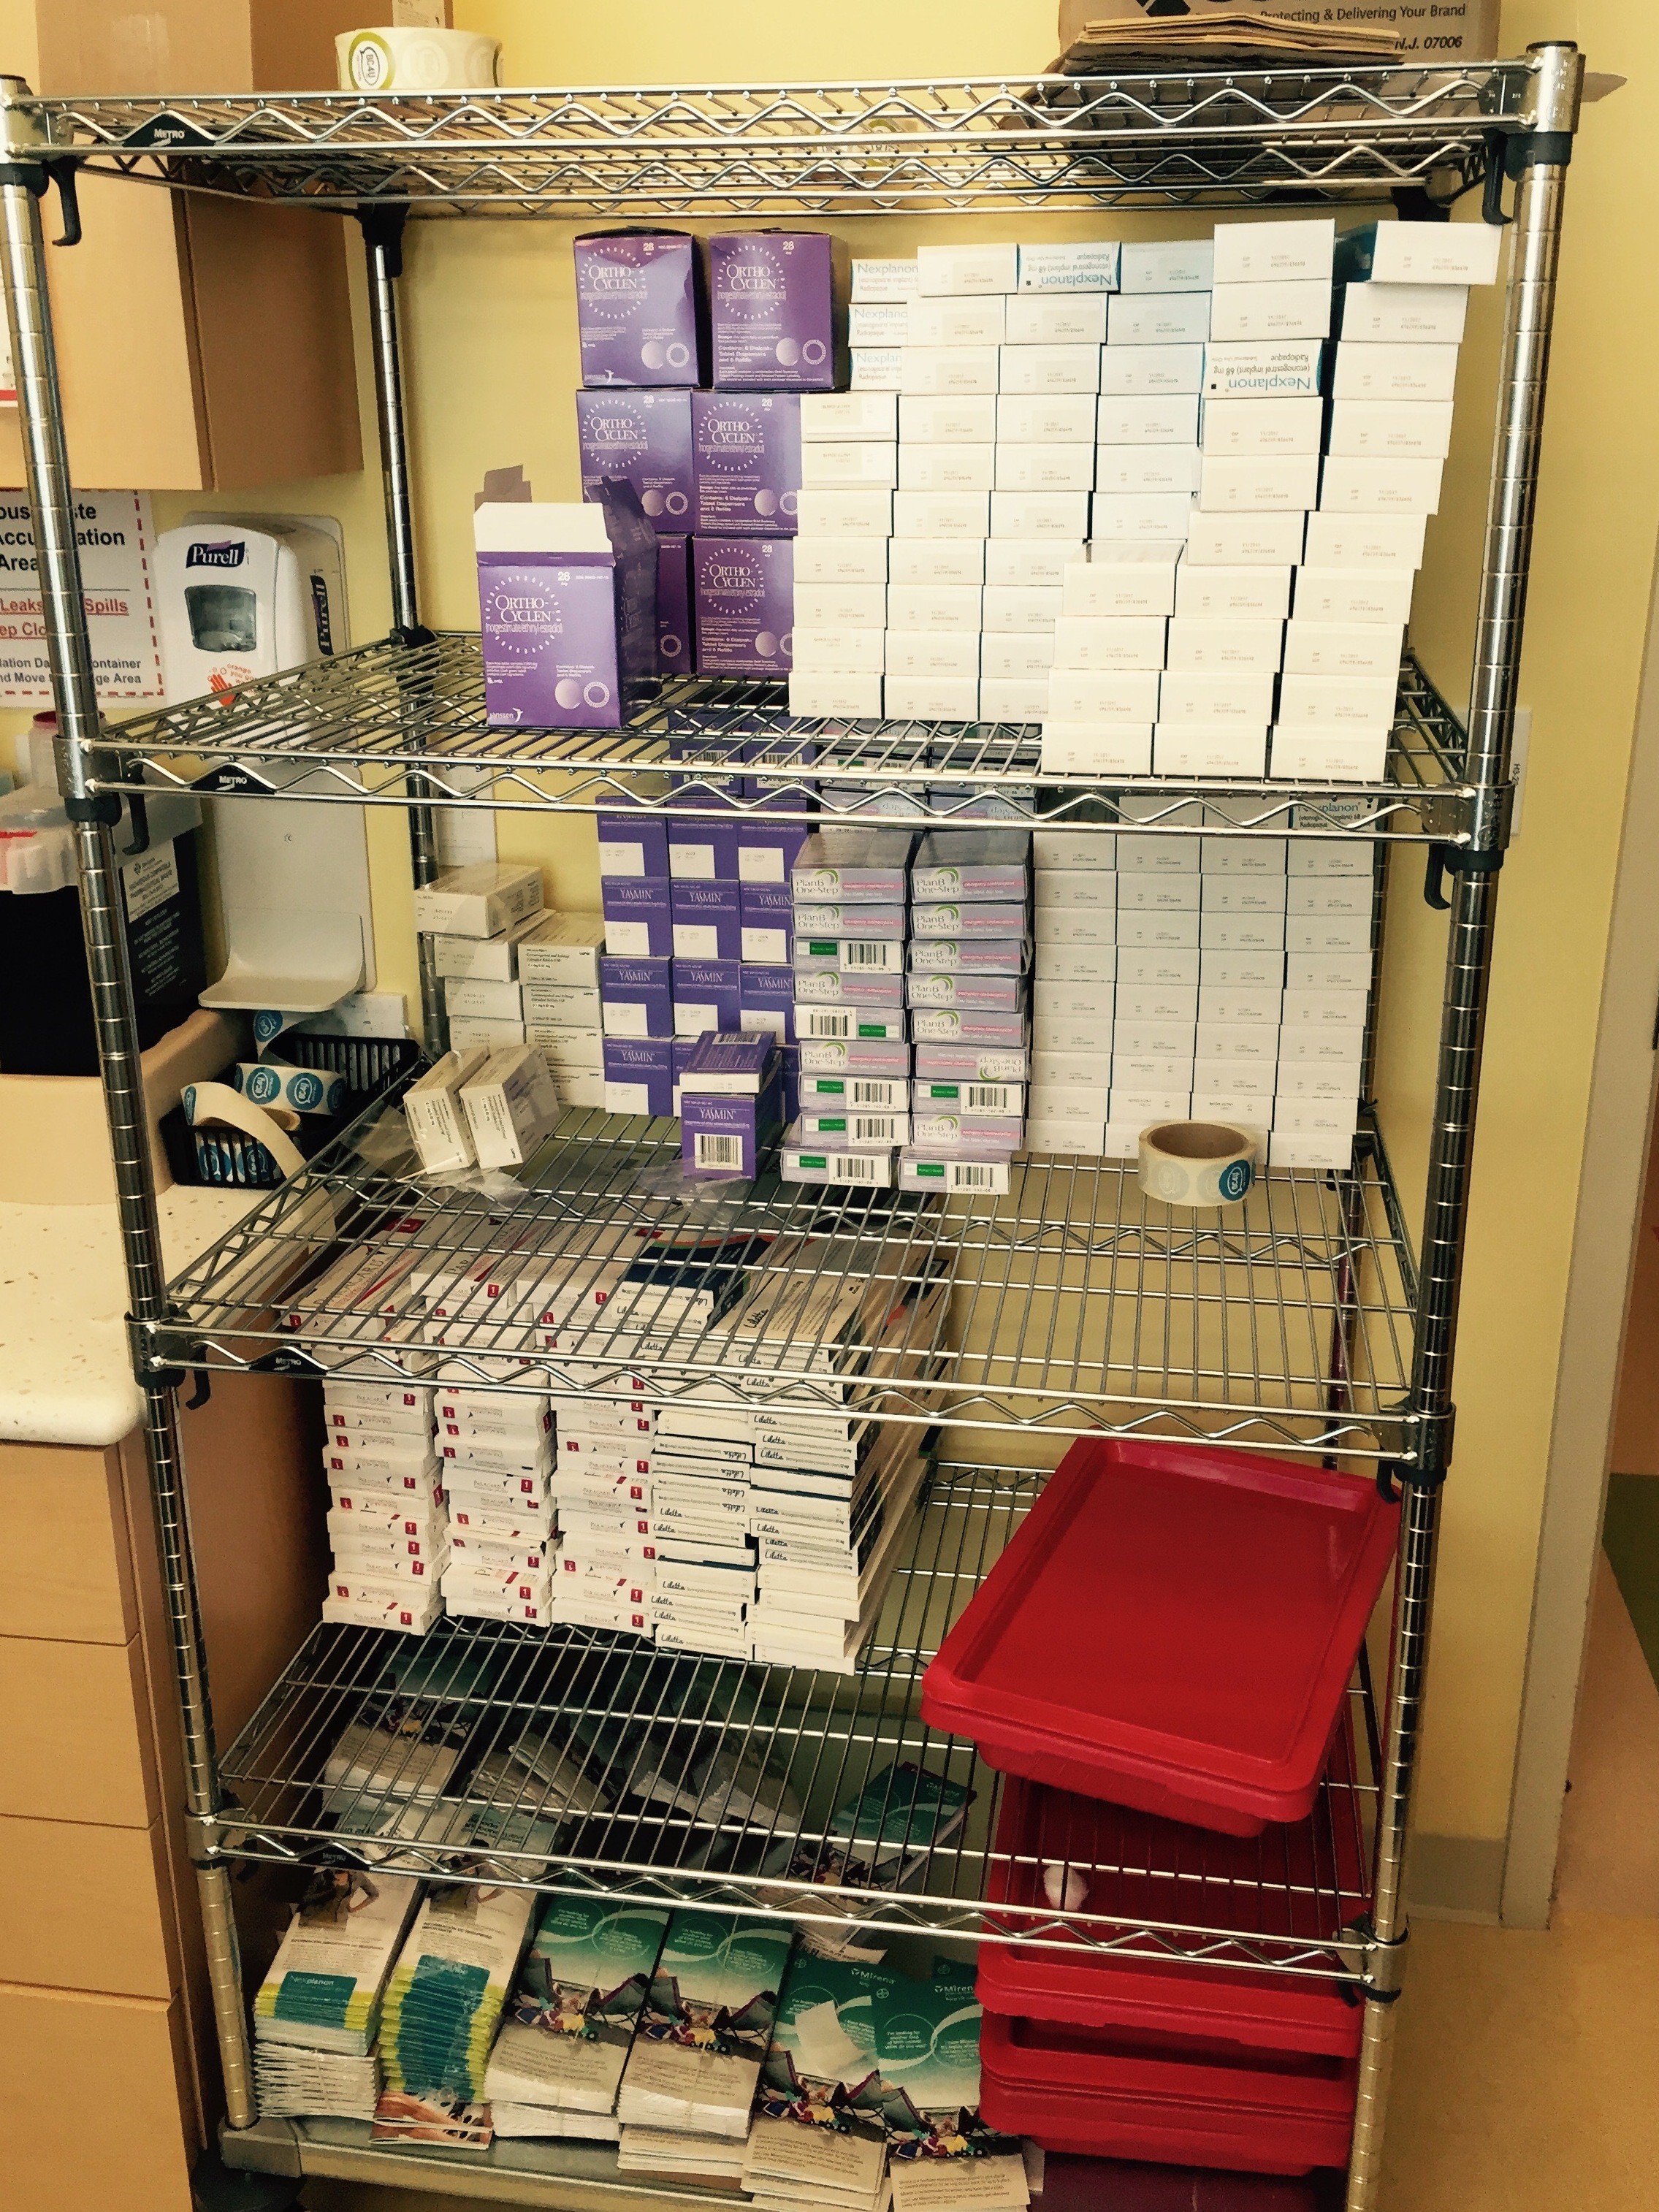 The shelf of long-lasting birth control at Children's Hospital outside Denver. The clinic's director said having the devices on hand is crucial, so young women don't have to make a second visit. But that costs money. Scott Horsley/NPR